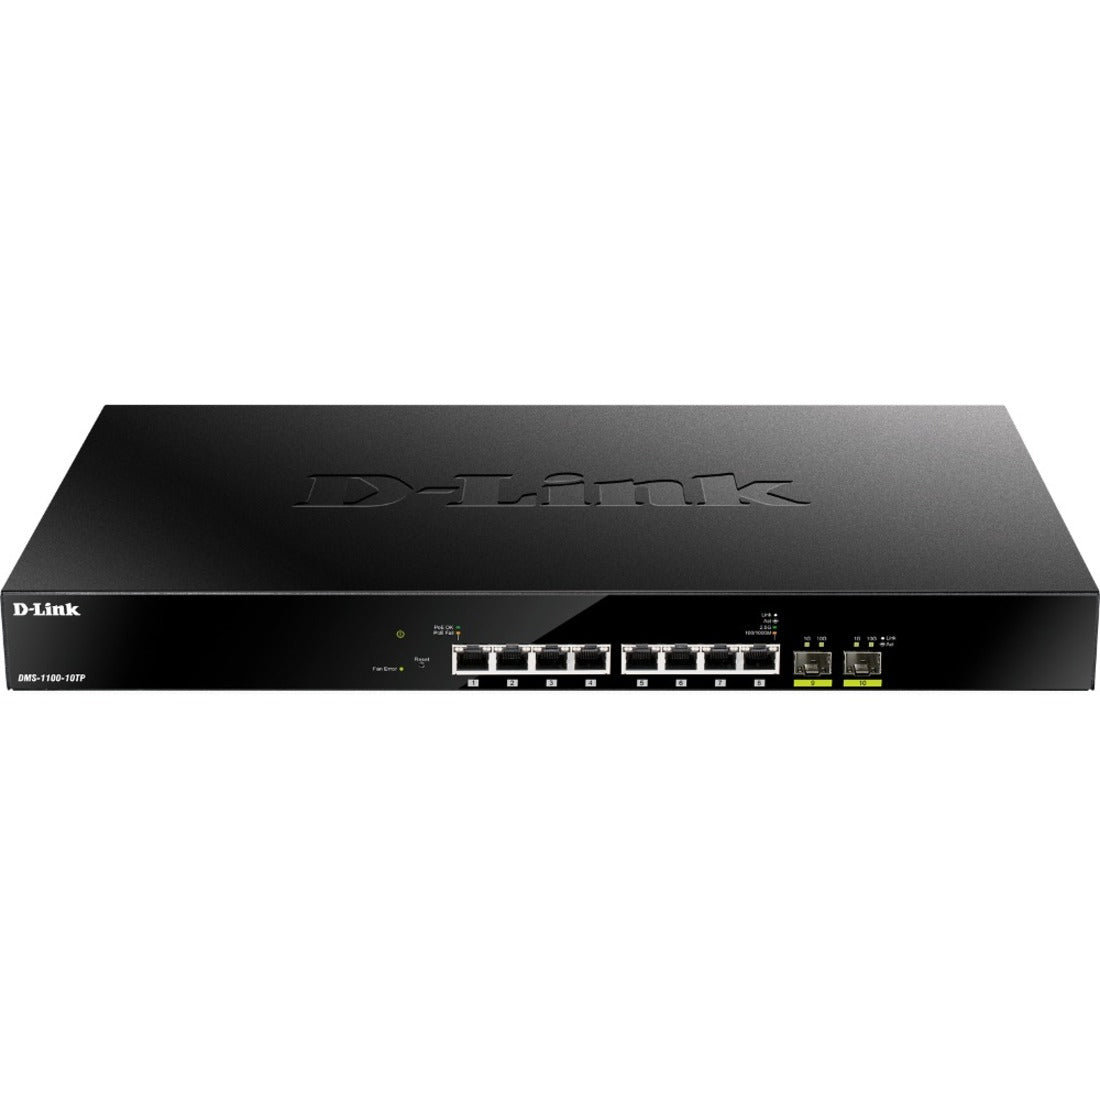 D-Link DMS-1100-10TP 8-Port Multi-Gigabit Ethernet Smart Managed PoE Switch with 2 10GbE SFP+ Ports, 240W PoE Budget